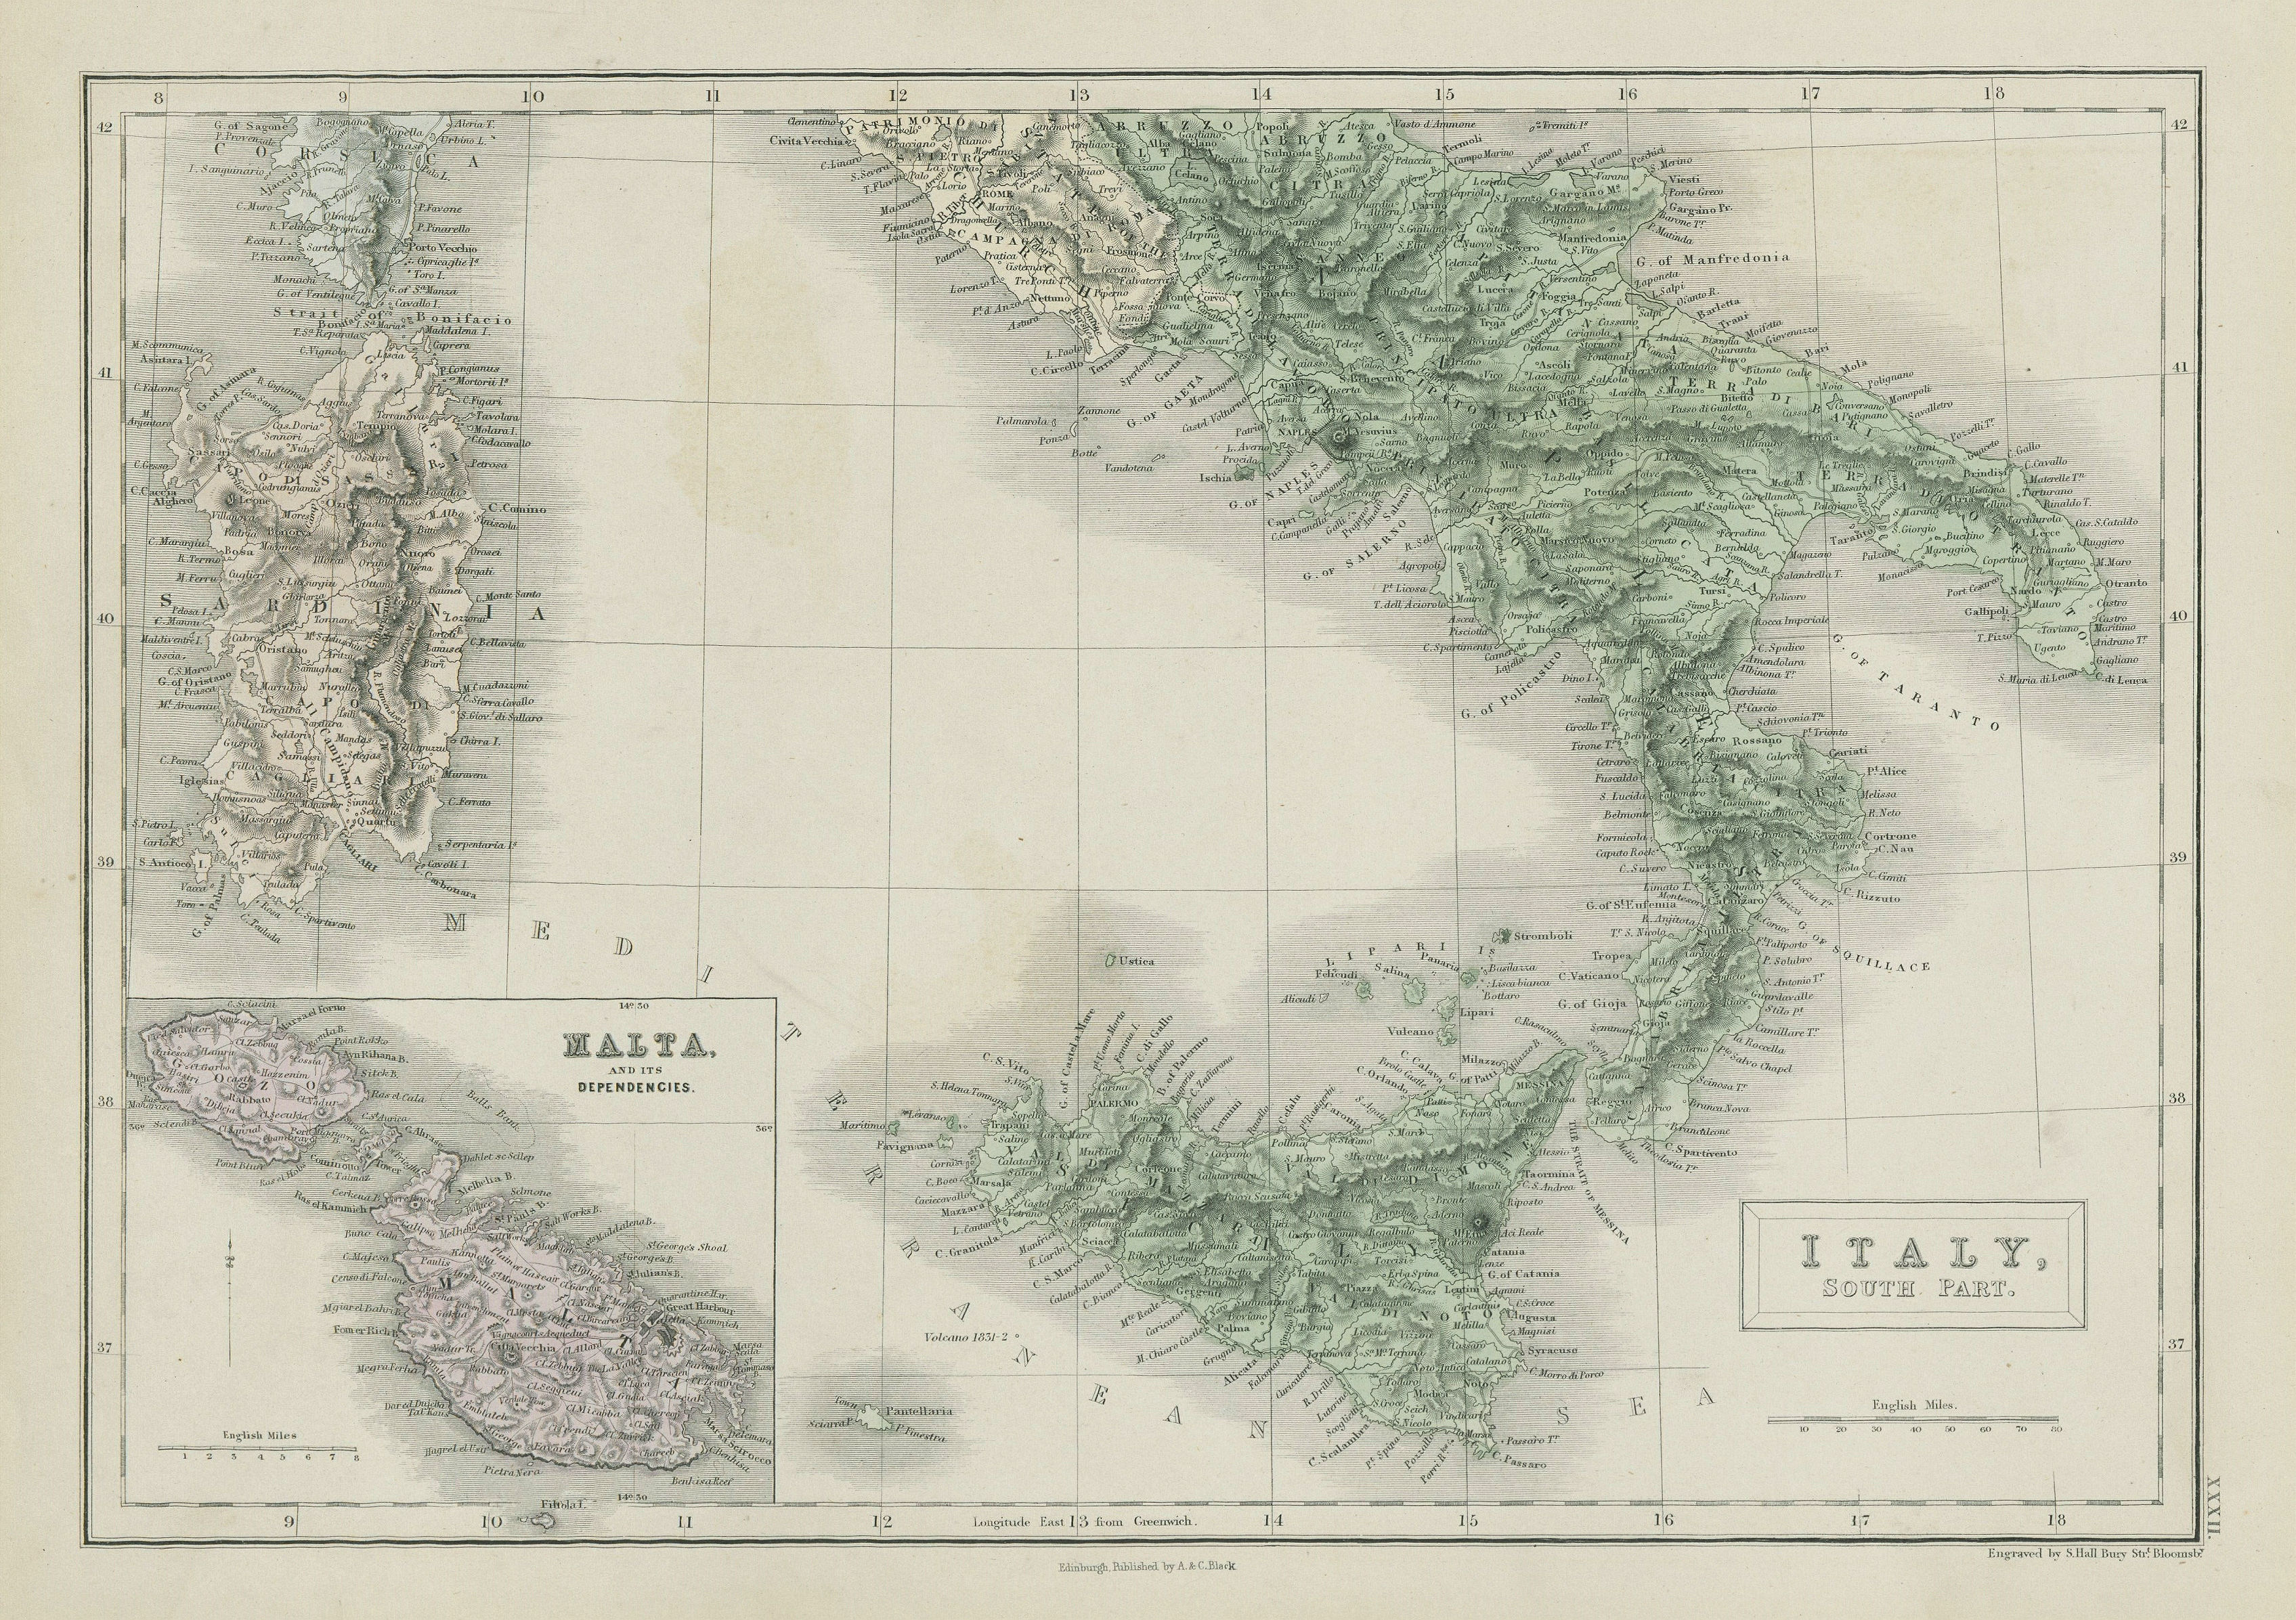 Associate Product Italy, south part. Inset Malta. Sardinia Sicily. SIDNEY HALL 1856 old map